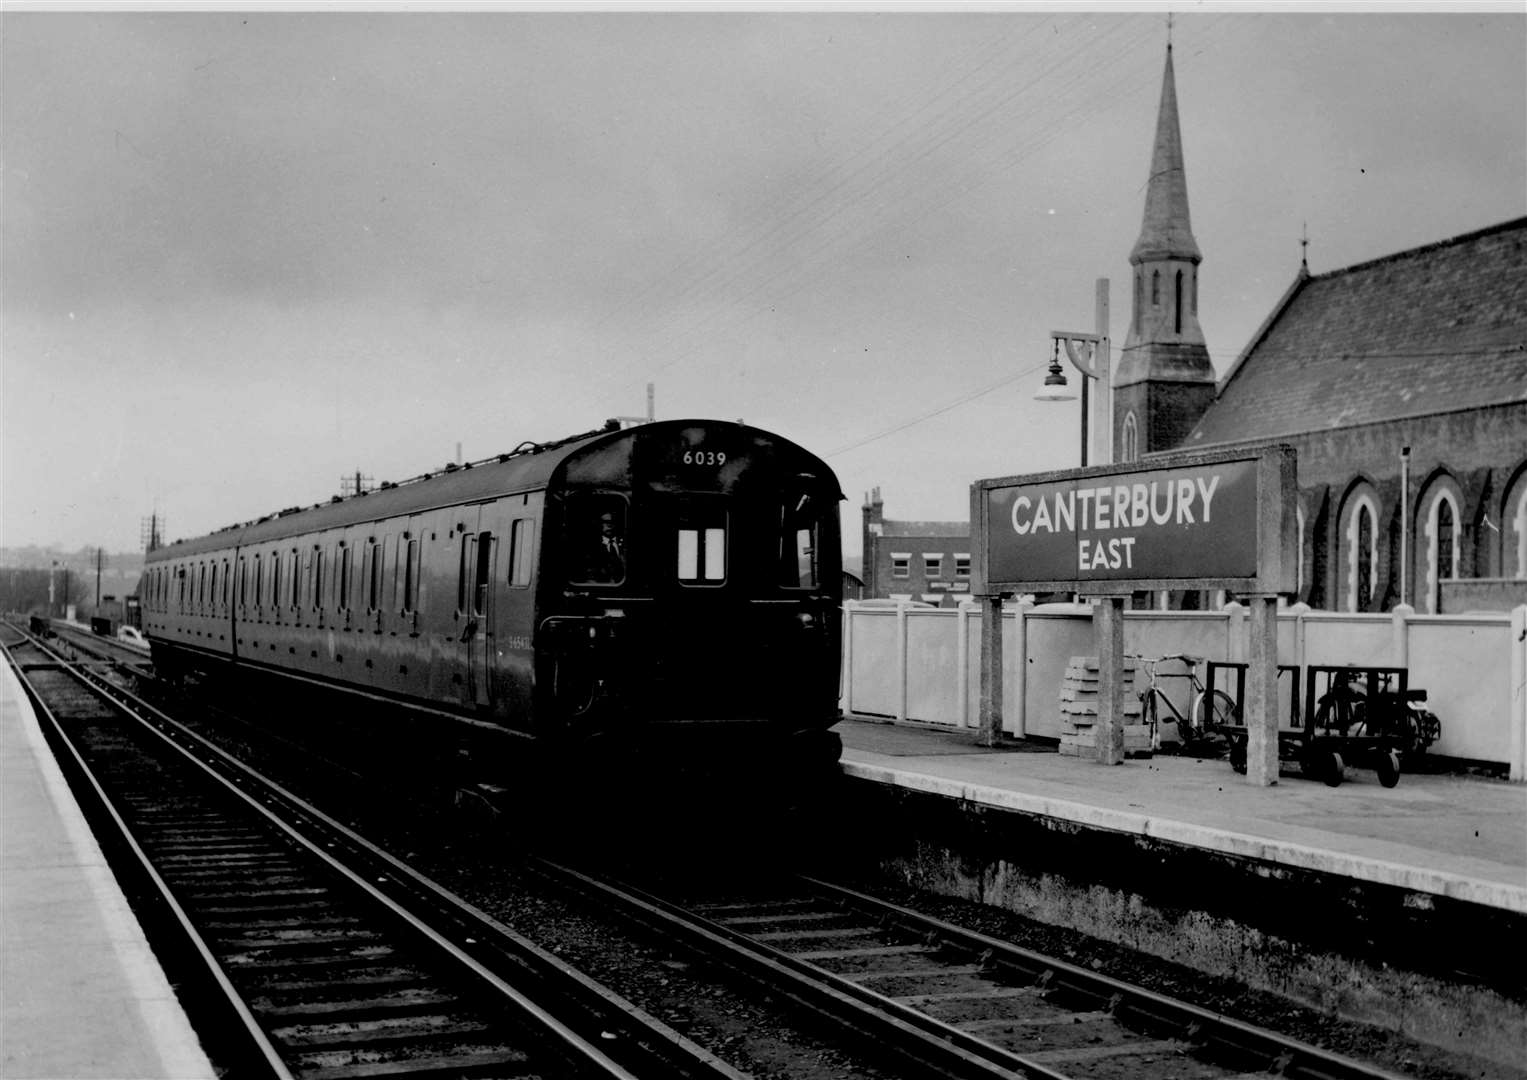 The first electric train to run in east Kent returned to Canterbury East station after a trial trip to Selling in April 1959. The full service began in June. Note the spire of St Andrew's Presbyterian Church (since demolished) in the background